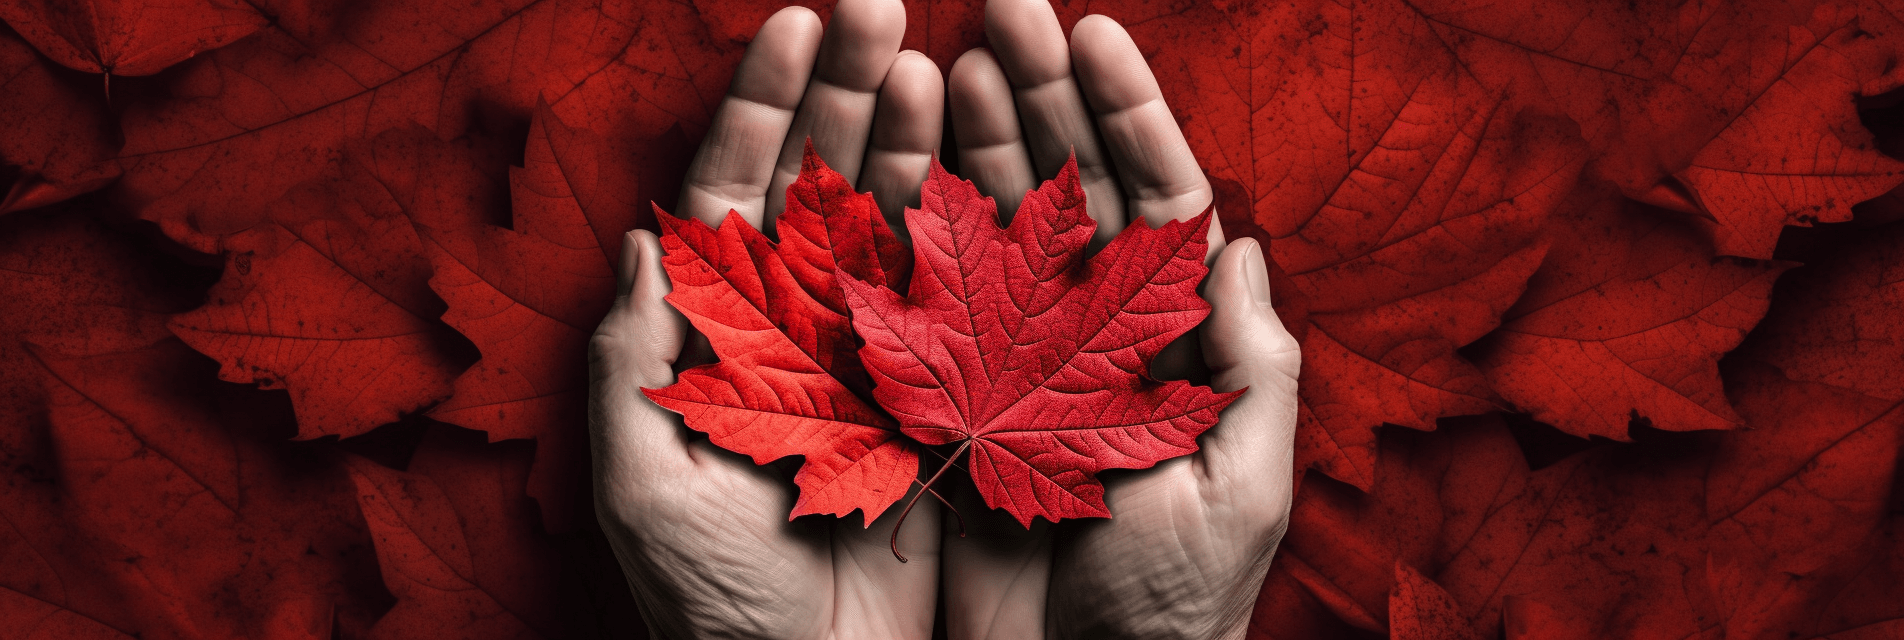 Design an image featuring interconnected canadian maple l ef20bc843a9d475ab5b60cff320794e